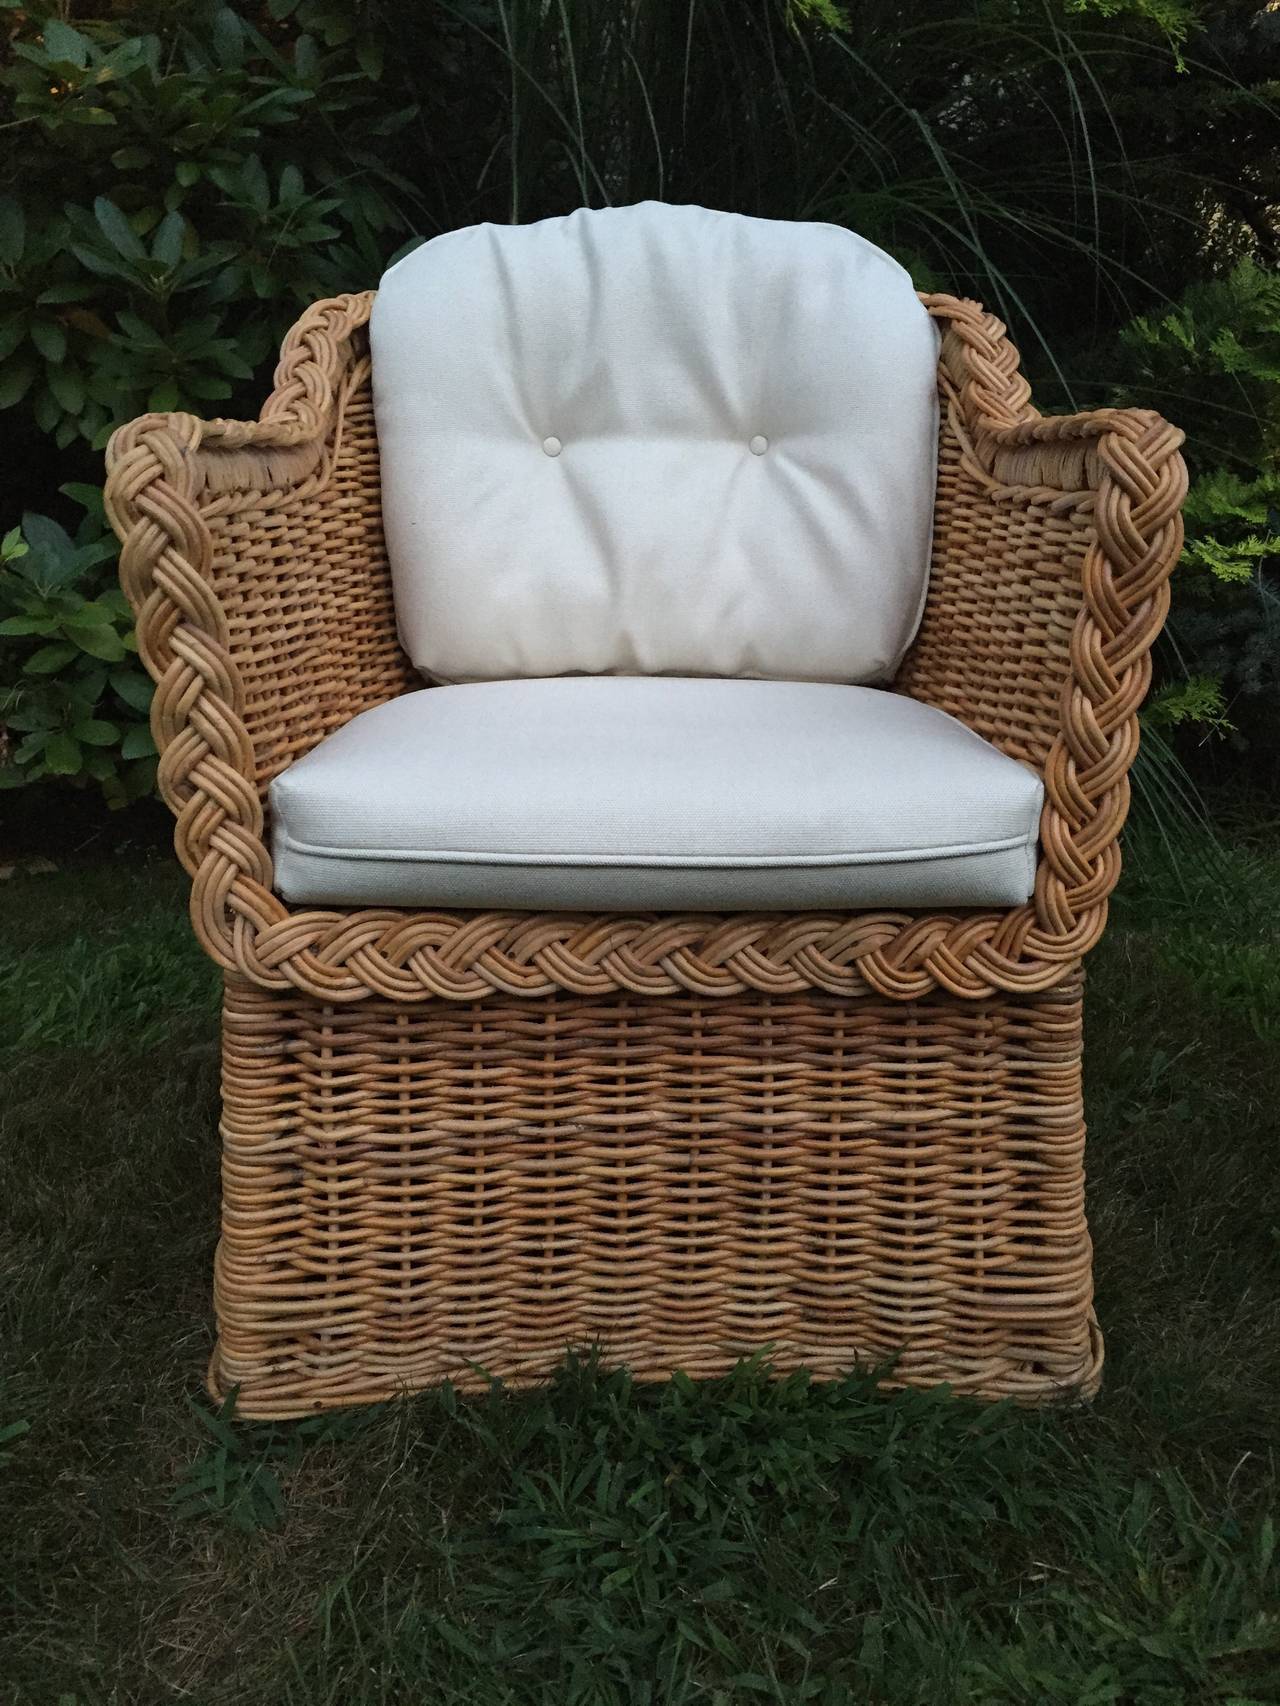 Pair of Michael Taylor wicker/rattan weaved armchairs, with two loose off-white weaved cushions wit button tufts. Wonderful Construction and very comfortable.